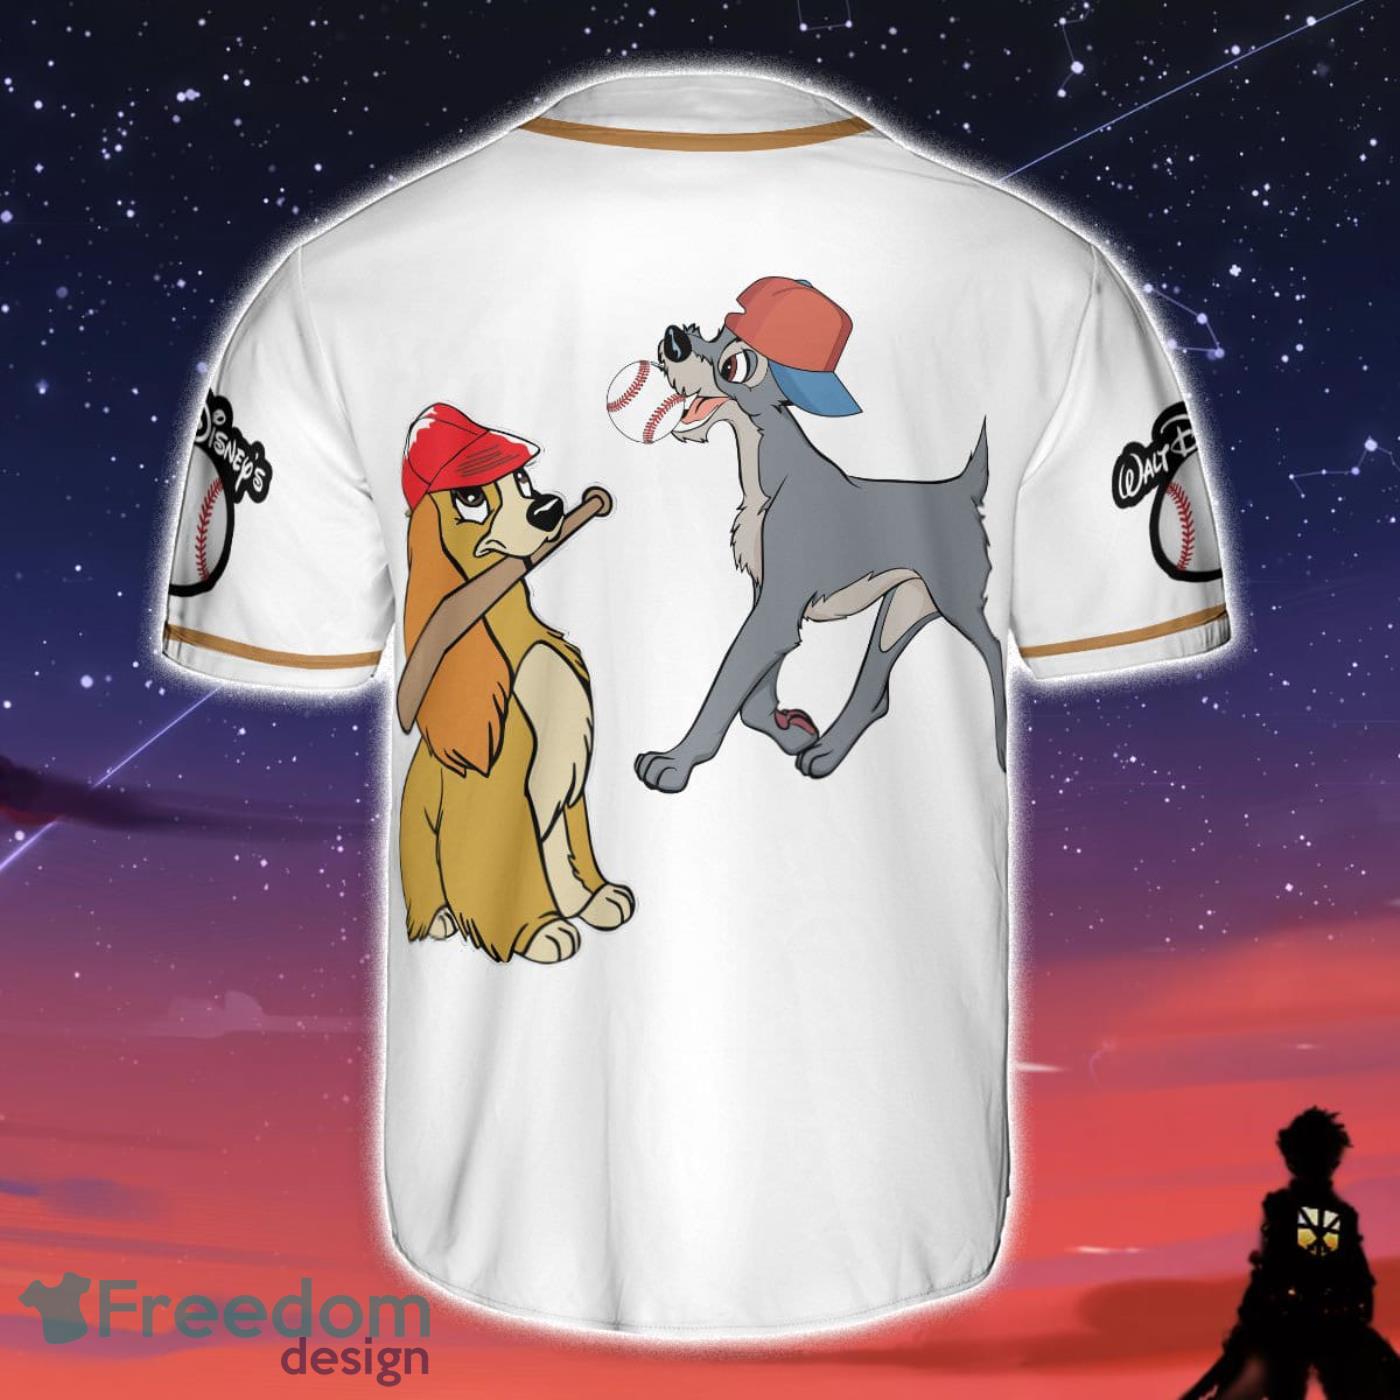 Lady ' The Tramp Dogs Disney Cartoon Graphics White Baseball Jersey Gift  For Sport Fans - Freedomdesign